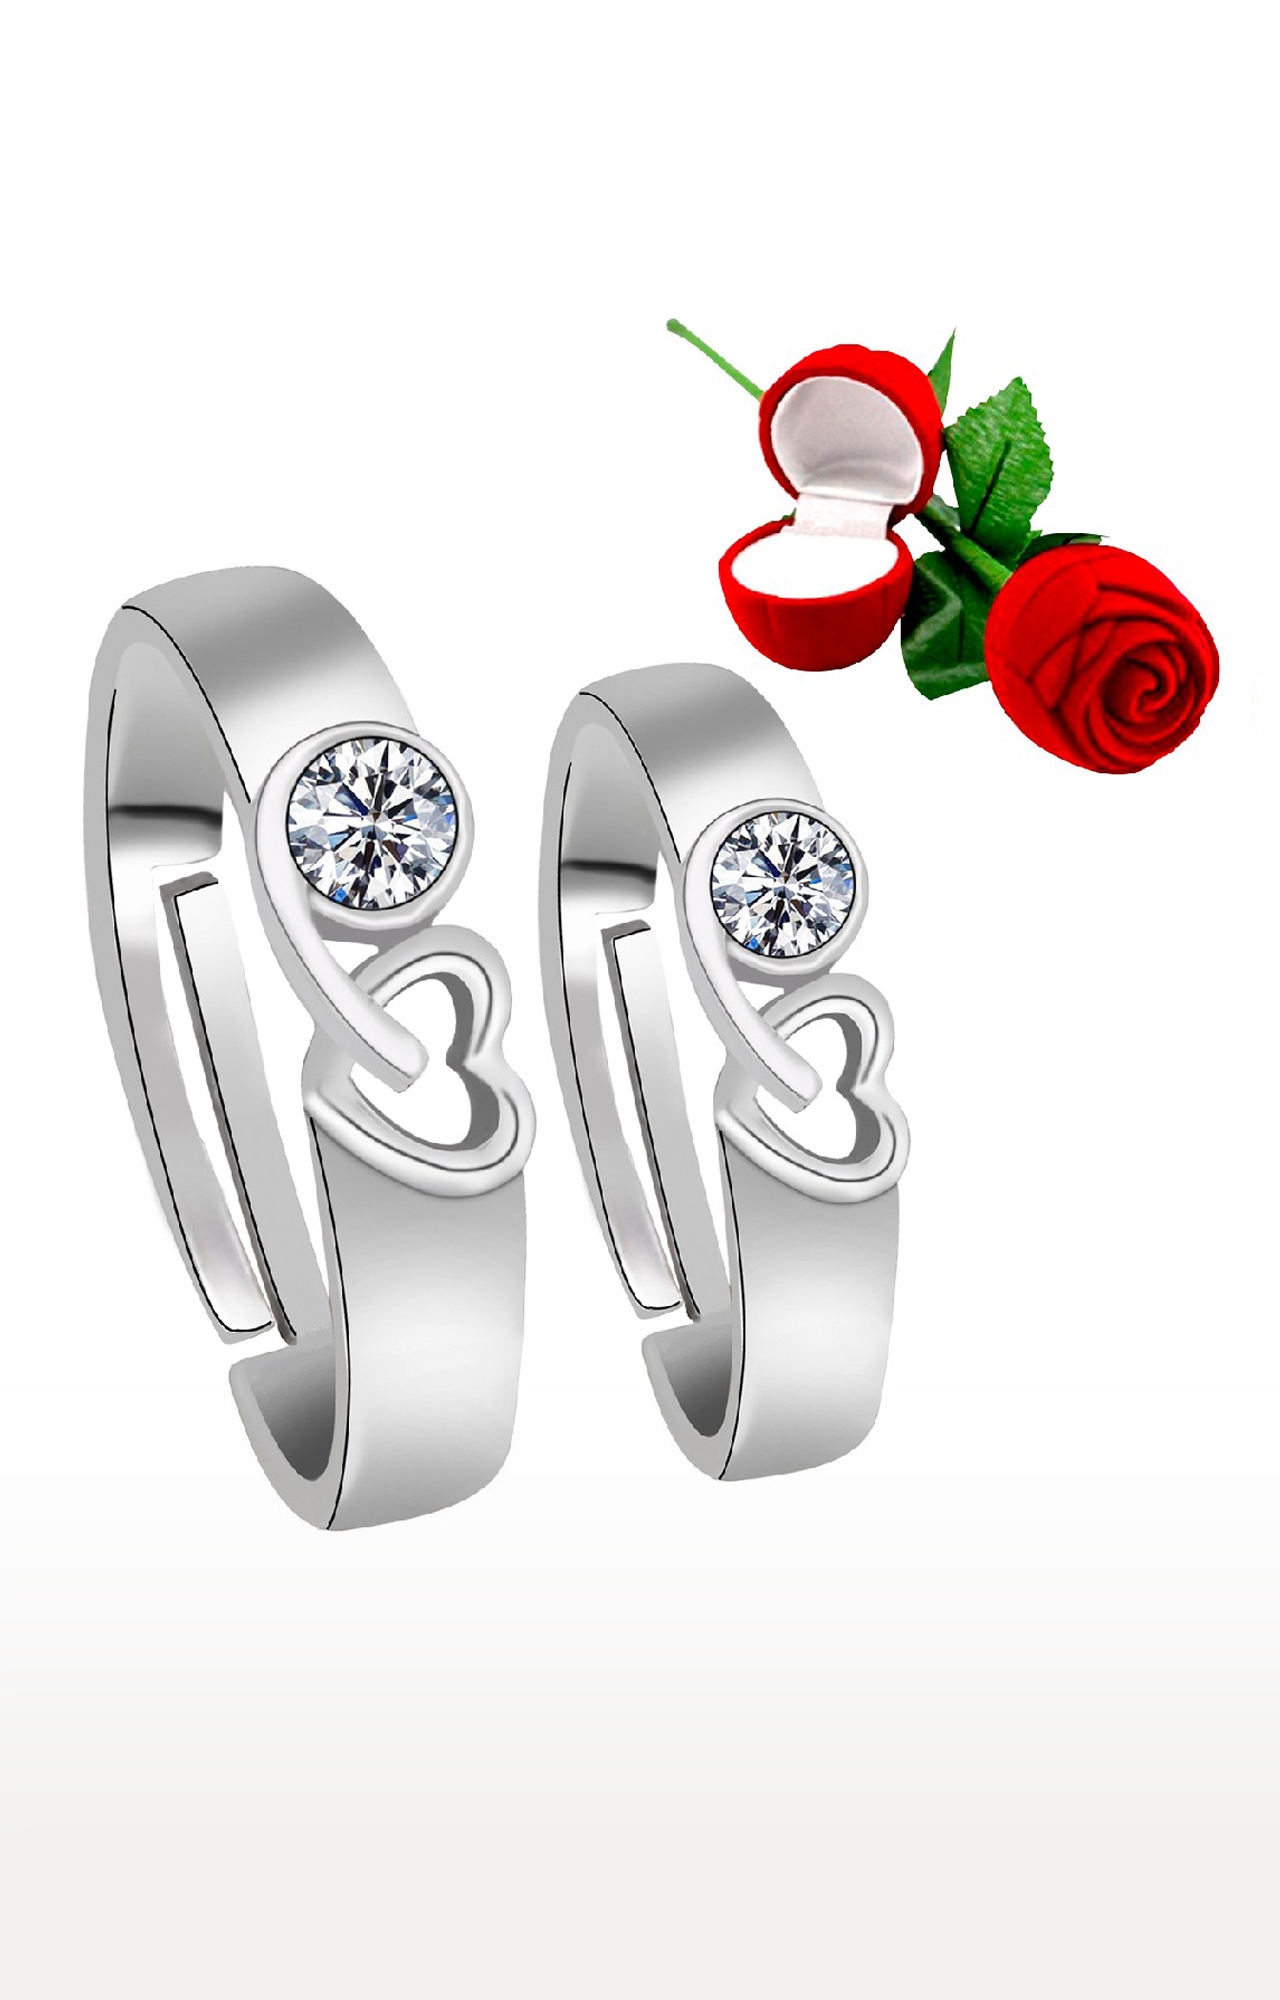 SILVER SHINE |  Silver Plated Adjustable Couple Rings Set for lovers Ring with 1 Piece Red Rose Gift Box for Men and Women